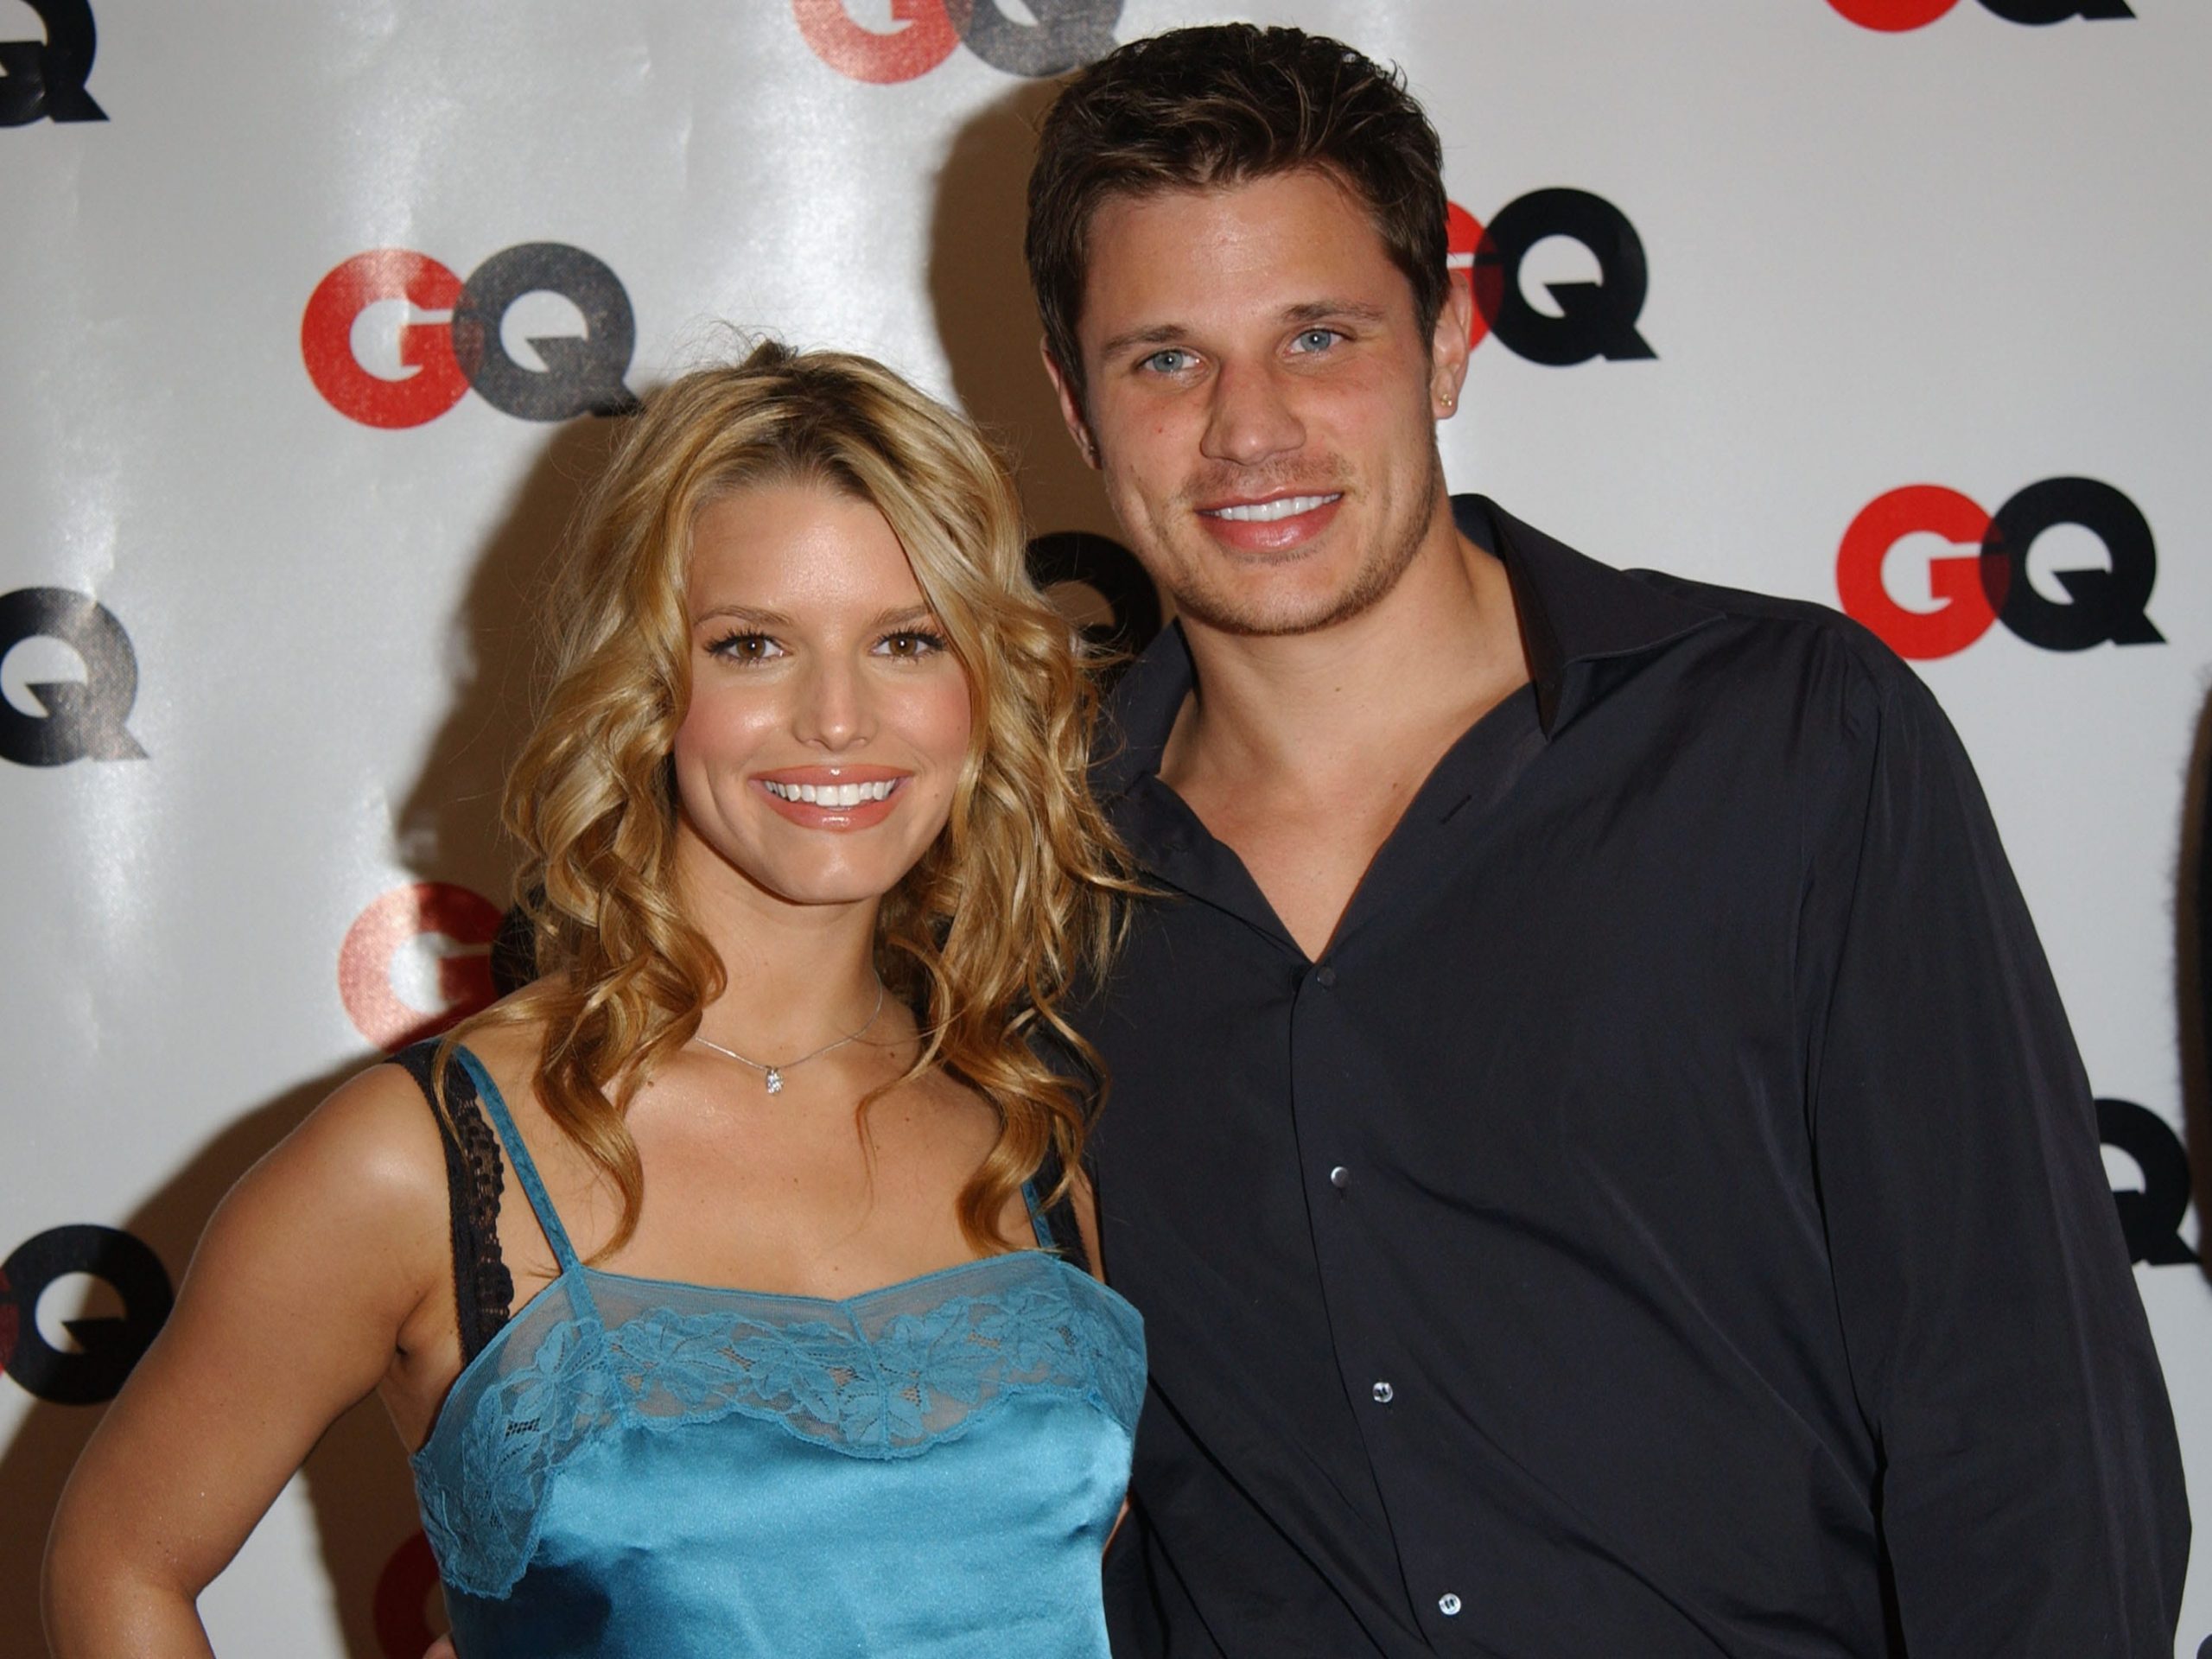 Jessica Simpson and Nick Lachey in 2003.